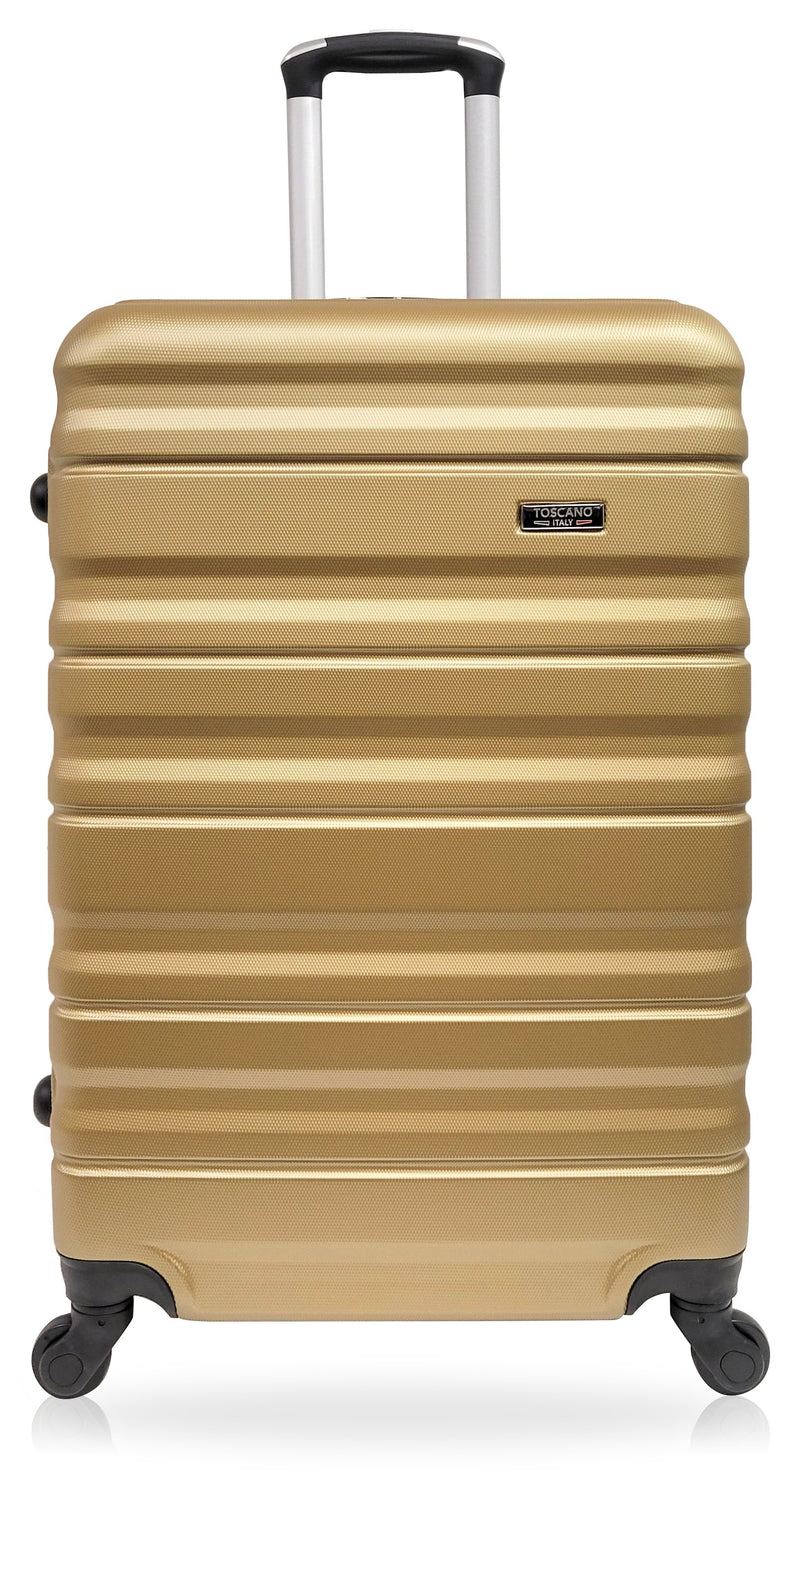 TOSCANO by Tucci 18-inch Barre Hardside Lightweight Luggage Suitcase